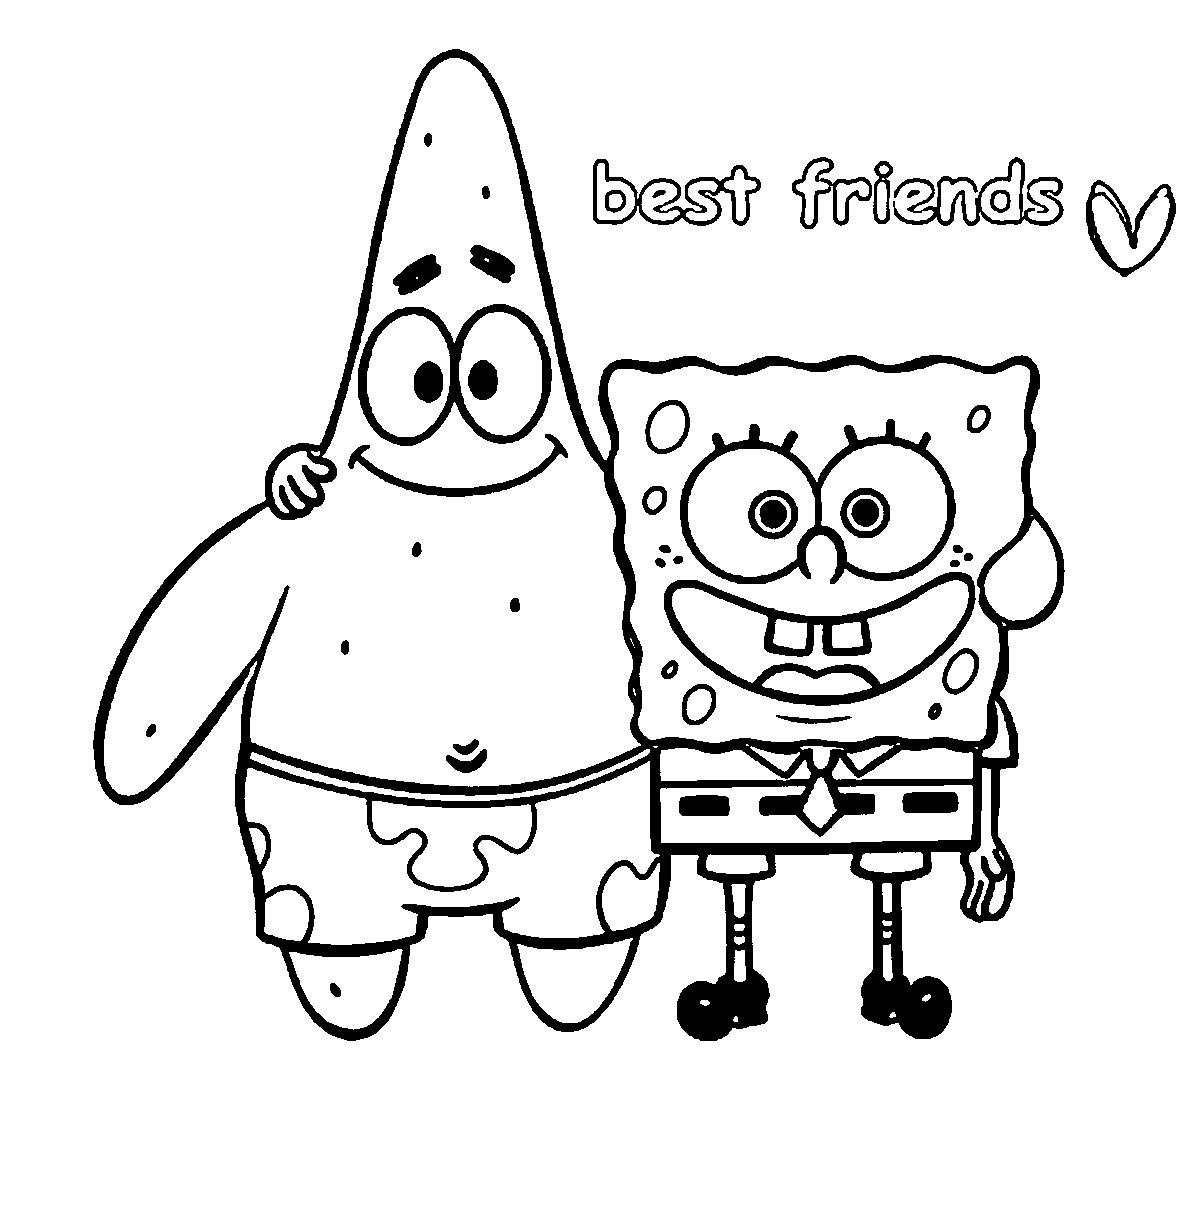 Best friends coloring pages pdf to print